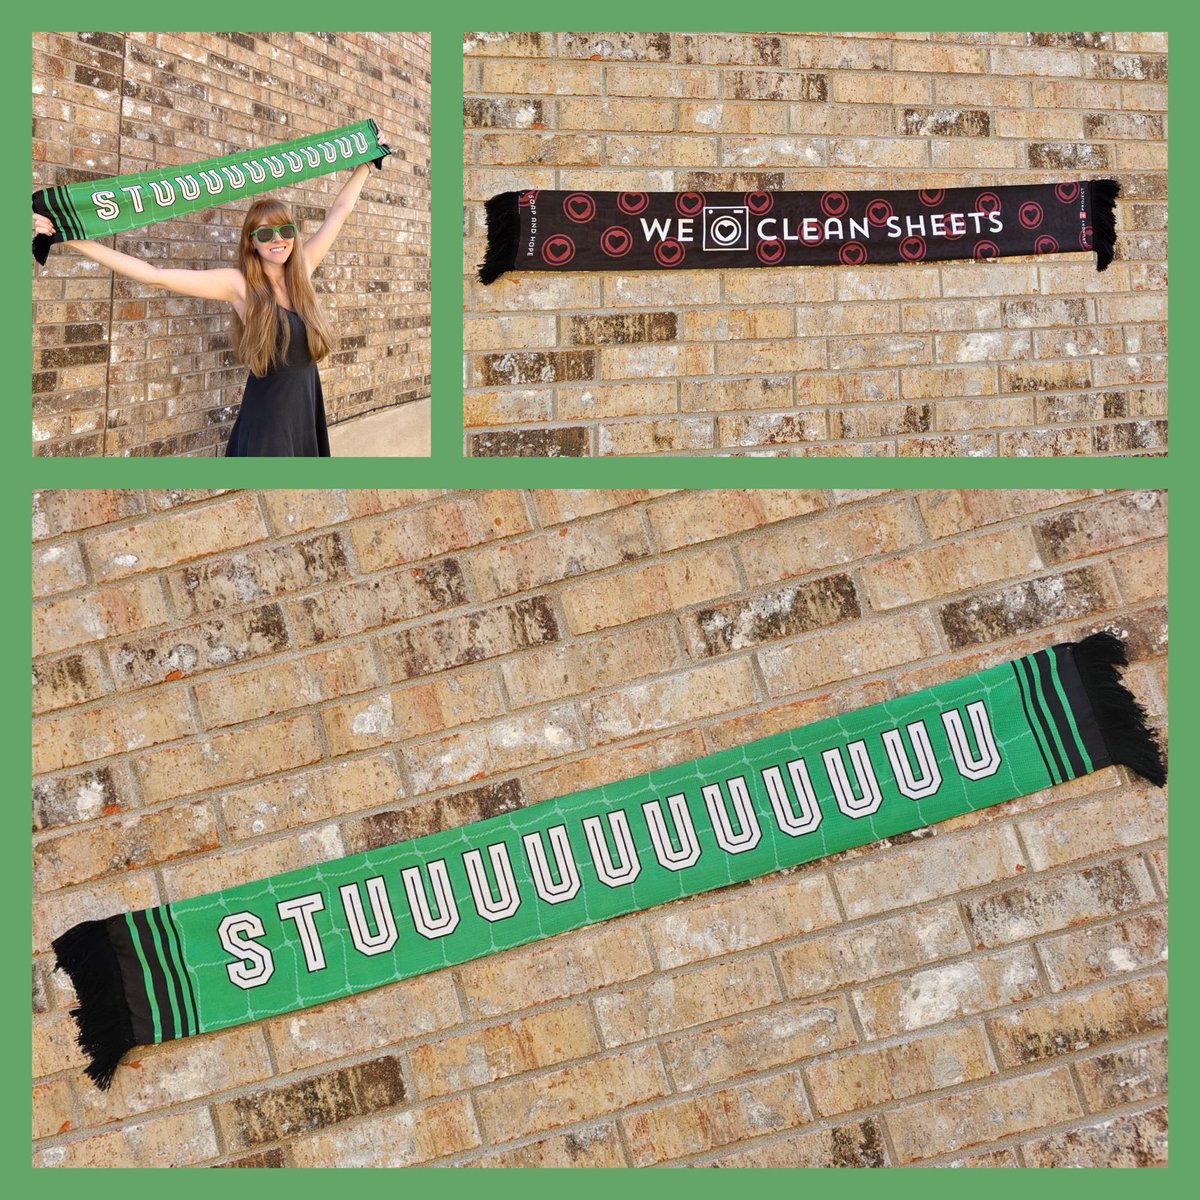 Hey Verdes! Anyone who ordered a Stuver x Laundry Project scarf, but missed all the pickup dates, I will be emailing you this week with info on the final pickup date. After that we will have to make special arrangements to get yours to you.